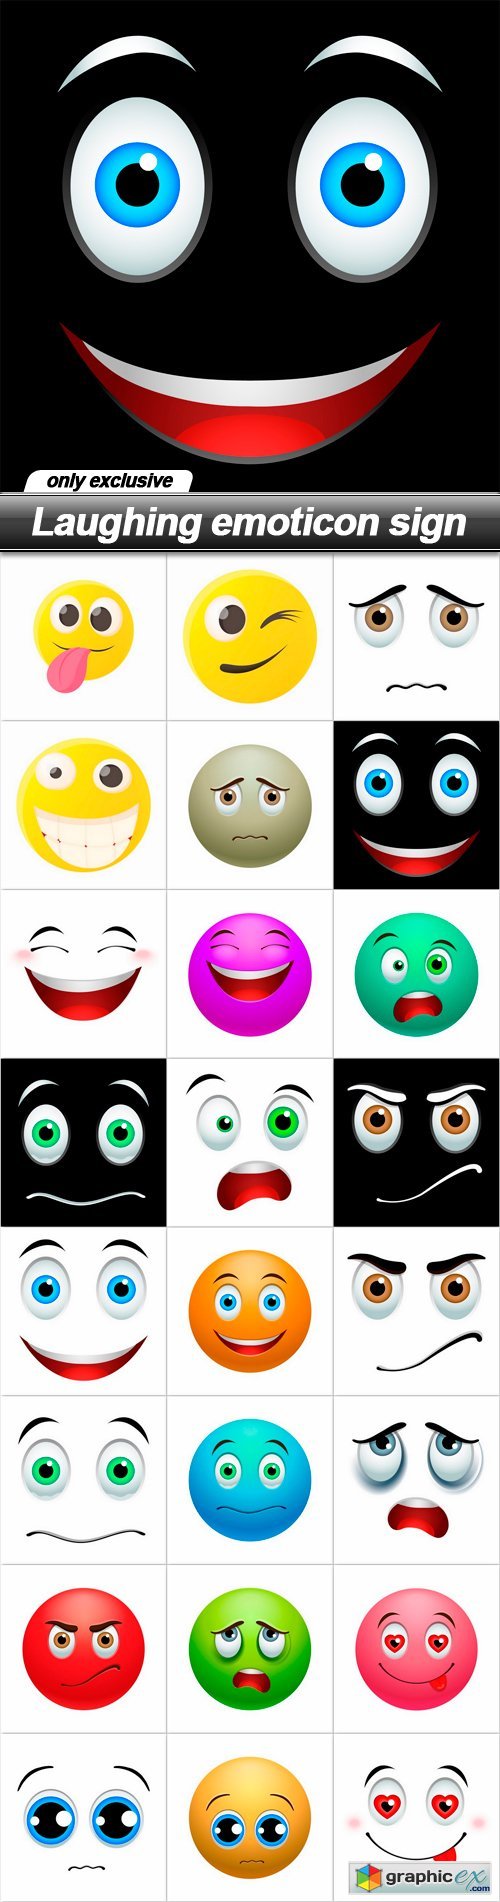 Laughing emoticon sign - 24 EPS